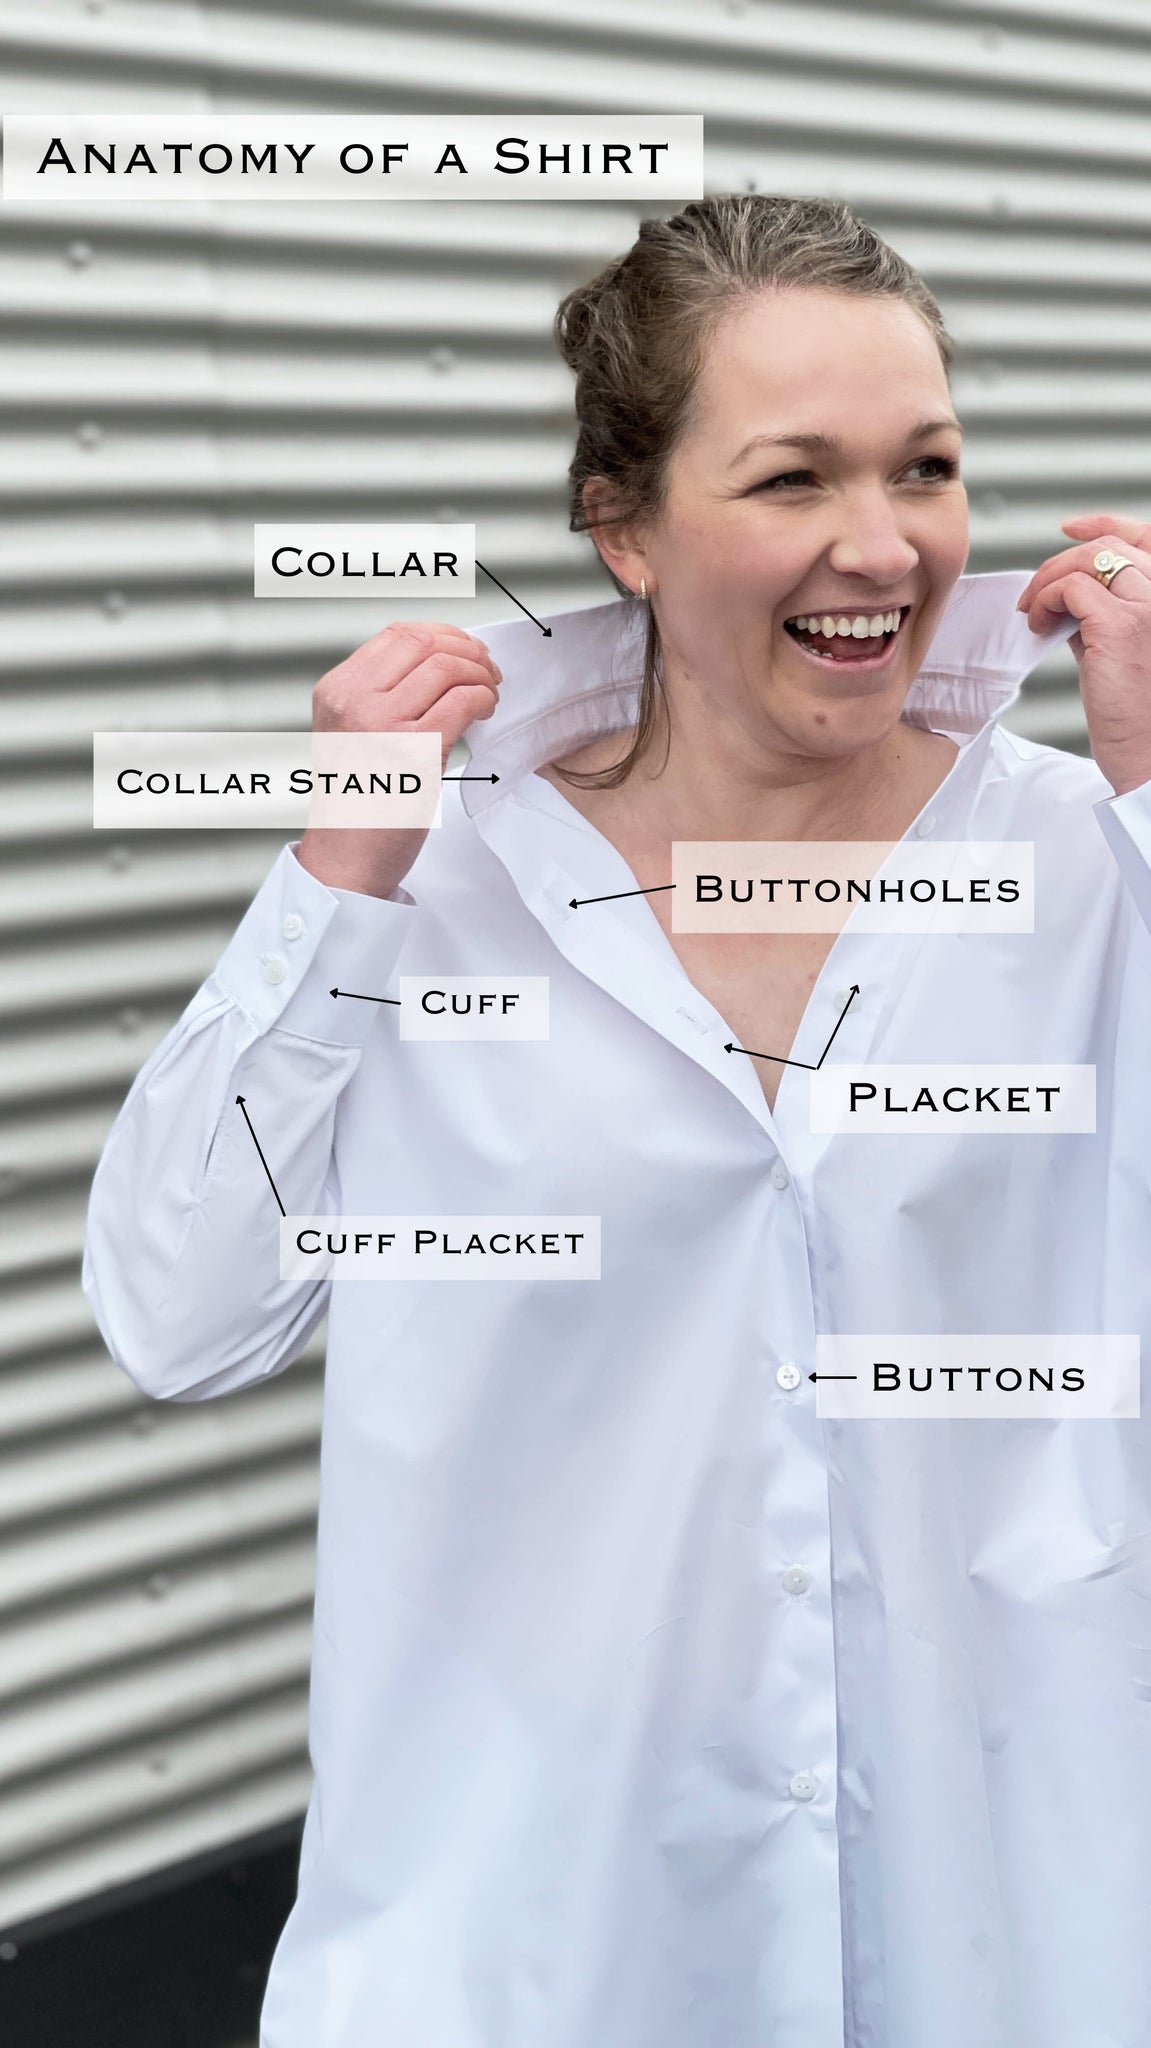 picture of a woman turning the collar of her shirt up. She is looking away from the camera and there are labels all over